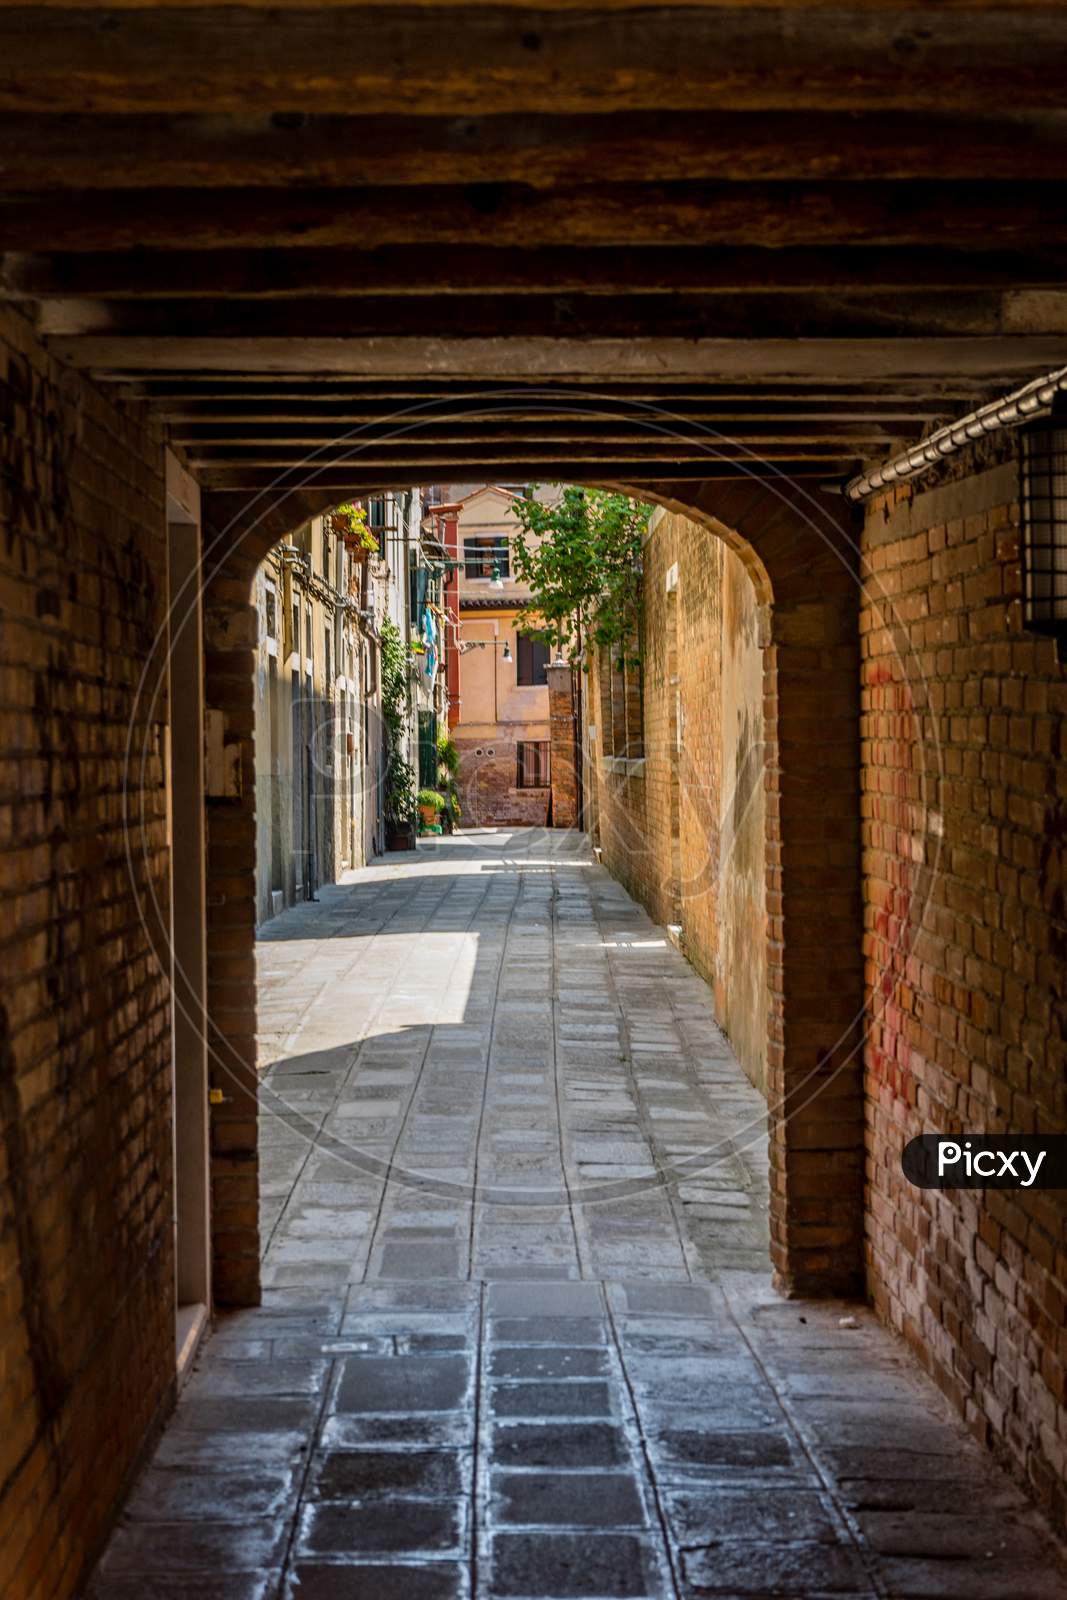 Italy, Venice, A Stone Building That Has A Bench In Front Of A Brick Wall